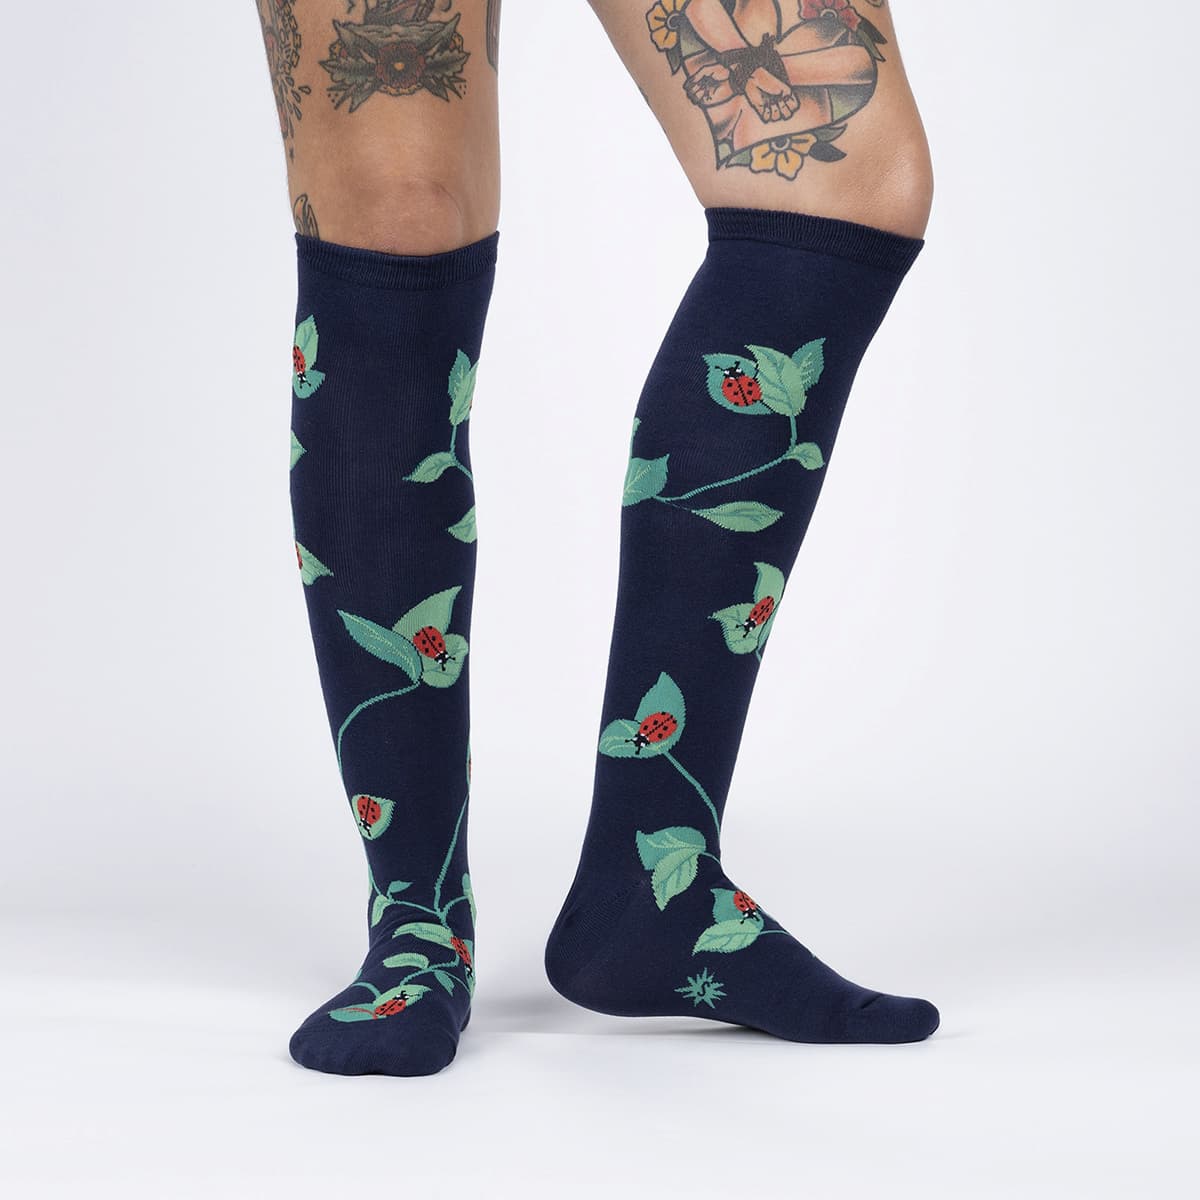 Person with tattoos wearing navy blue knee high socks with green leaves with red ladybugs on them all over - The Sockery